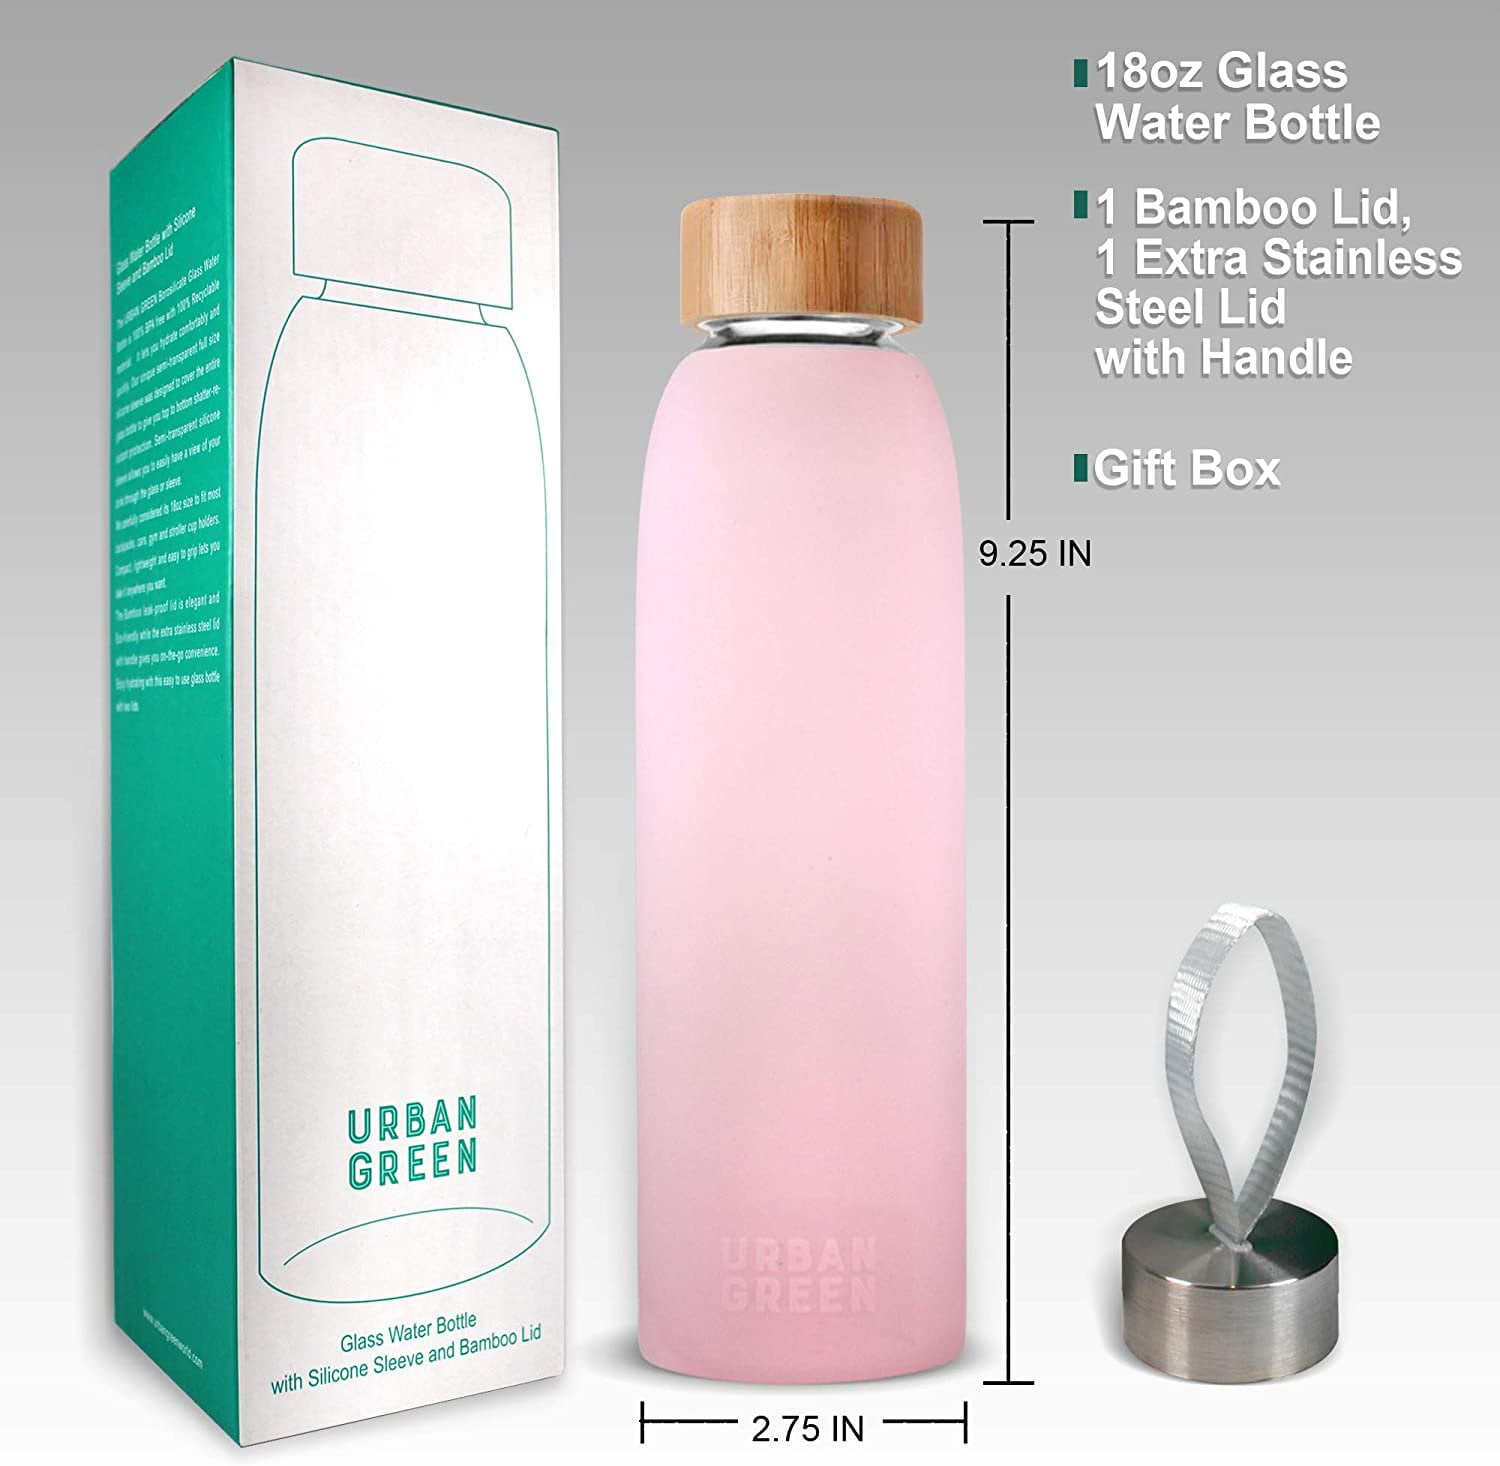 GROSCHE VENICE Eco-Friendly Glass Water Bottle with Bamboo lid and  Protective Sleeve, 22.6 fl oz Capacity, Water Color